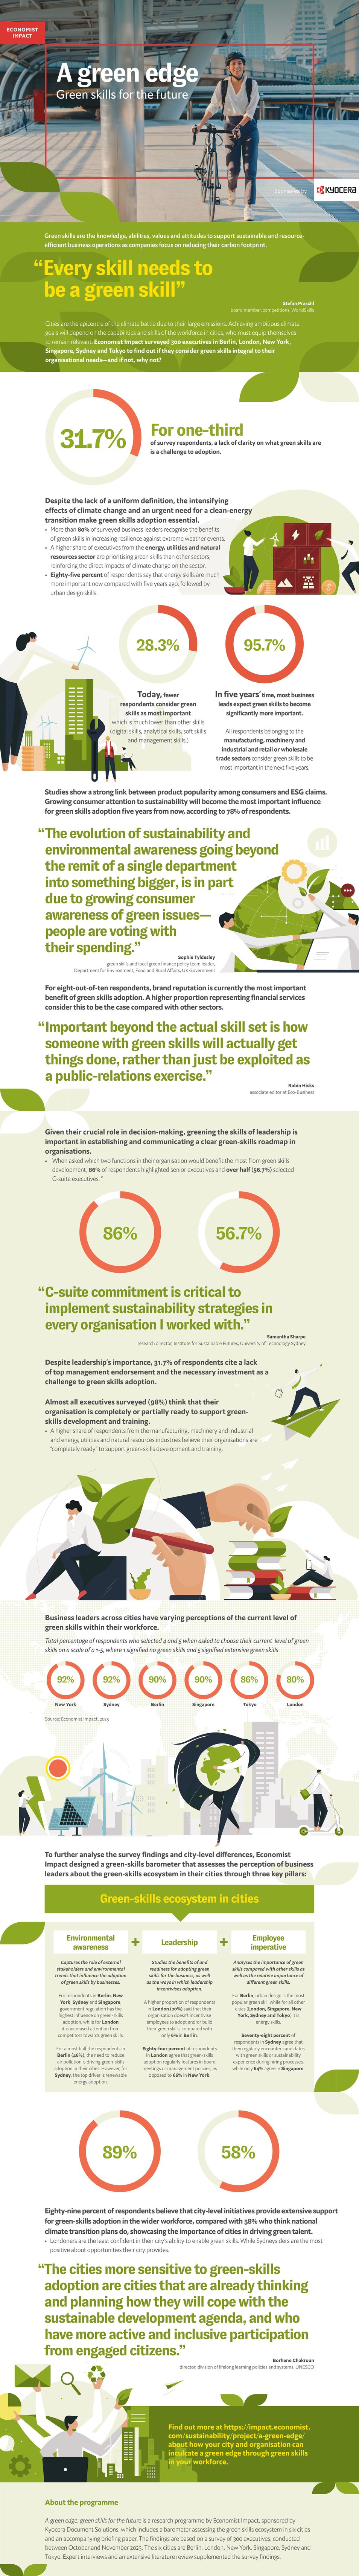 Infographic - A Green Edge